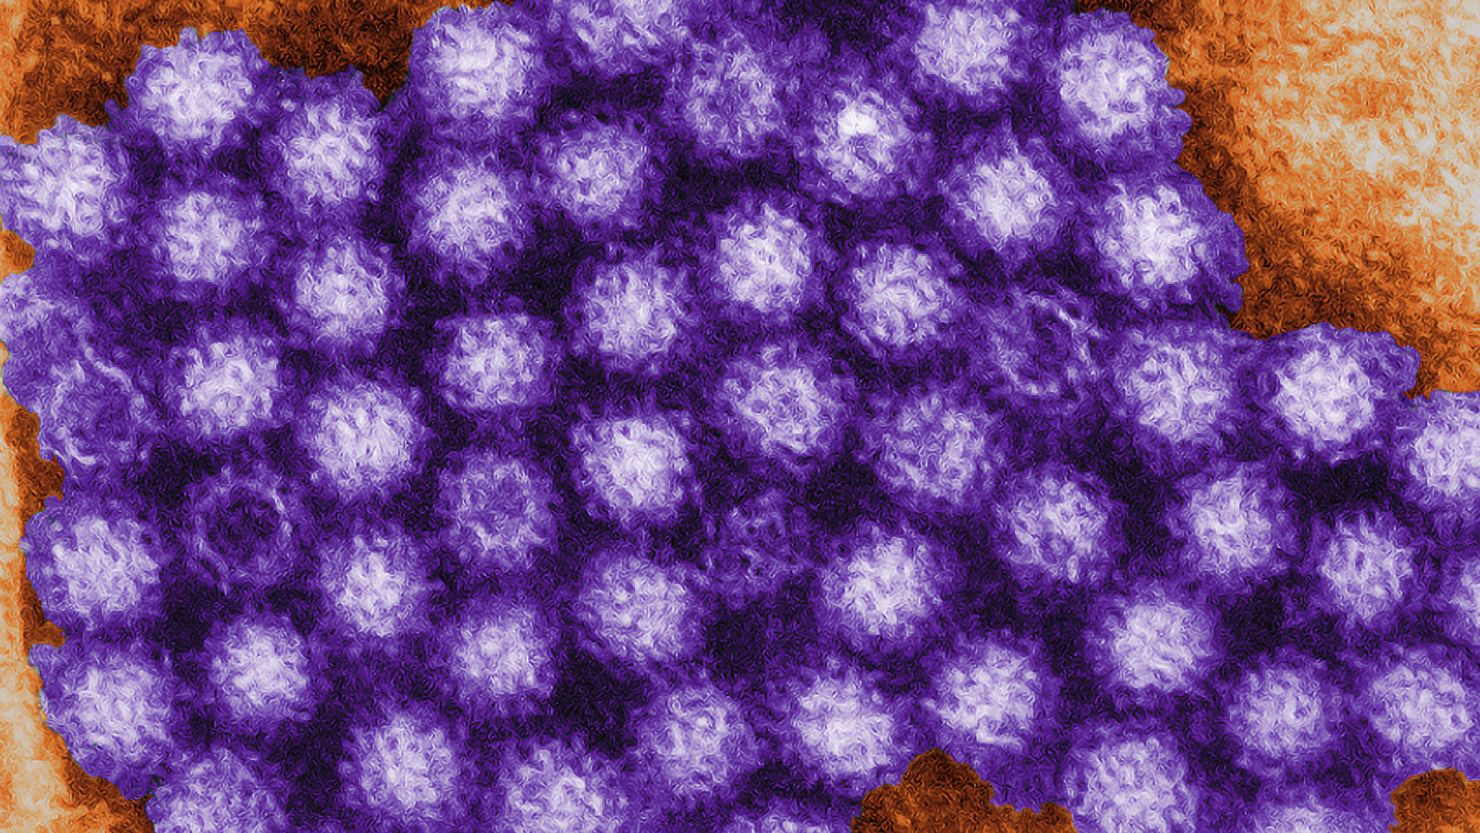 Noroviruses are a group of viruses that cause gastroenteritis.